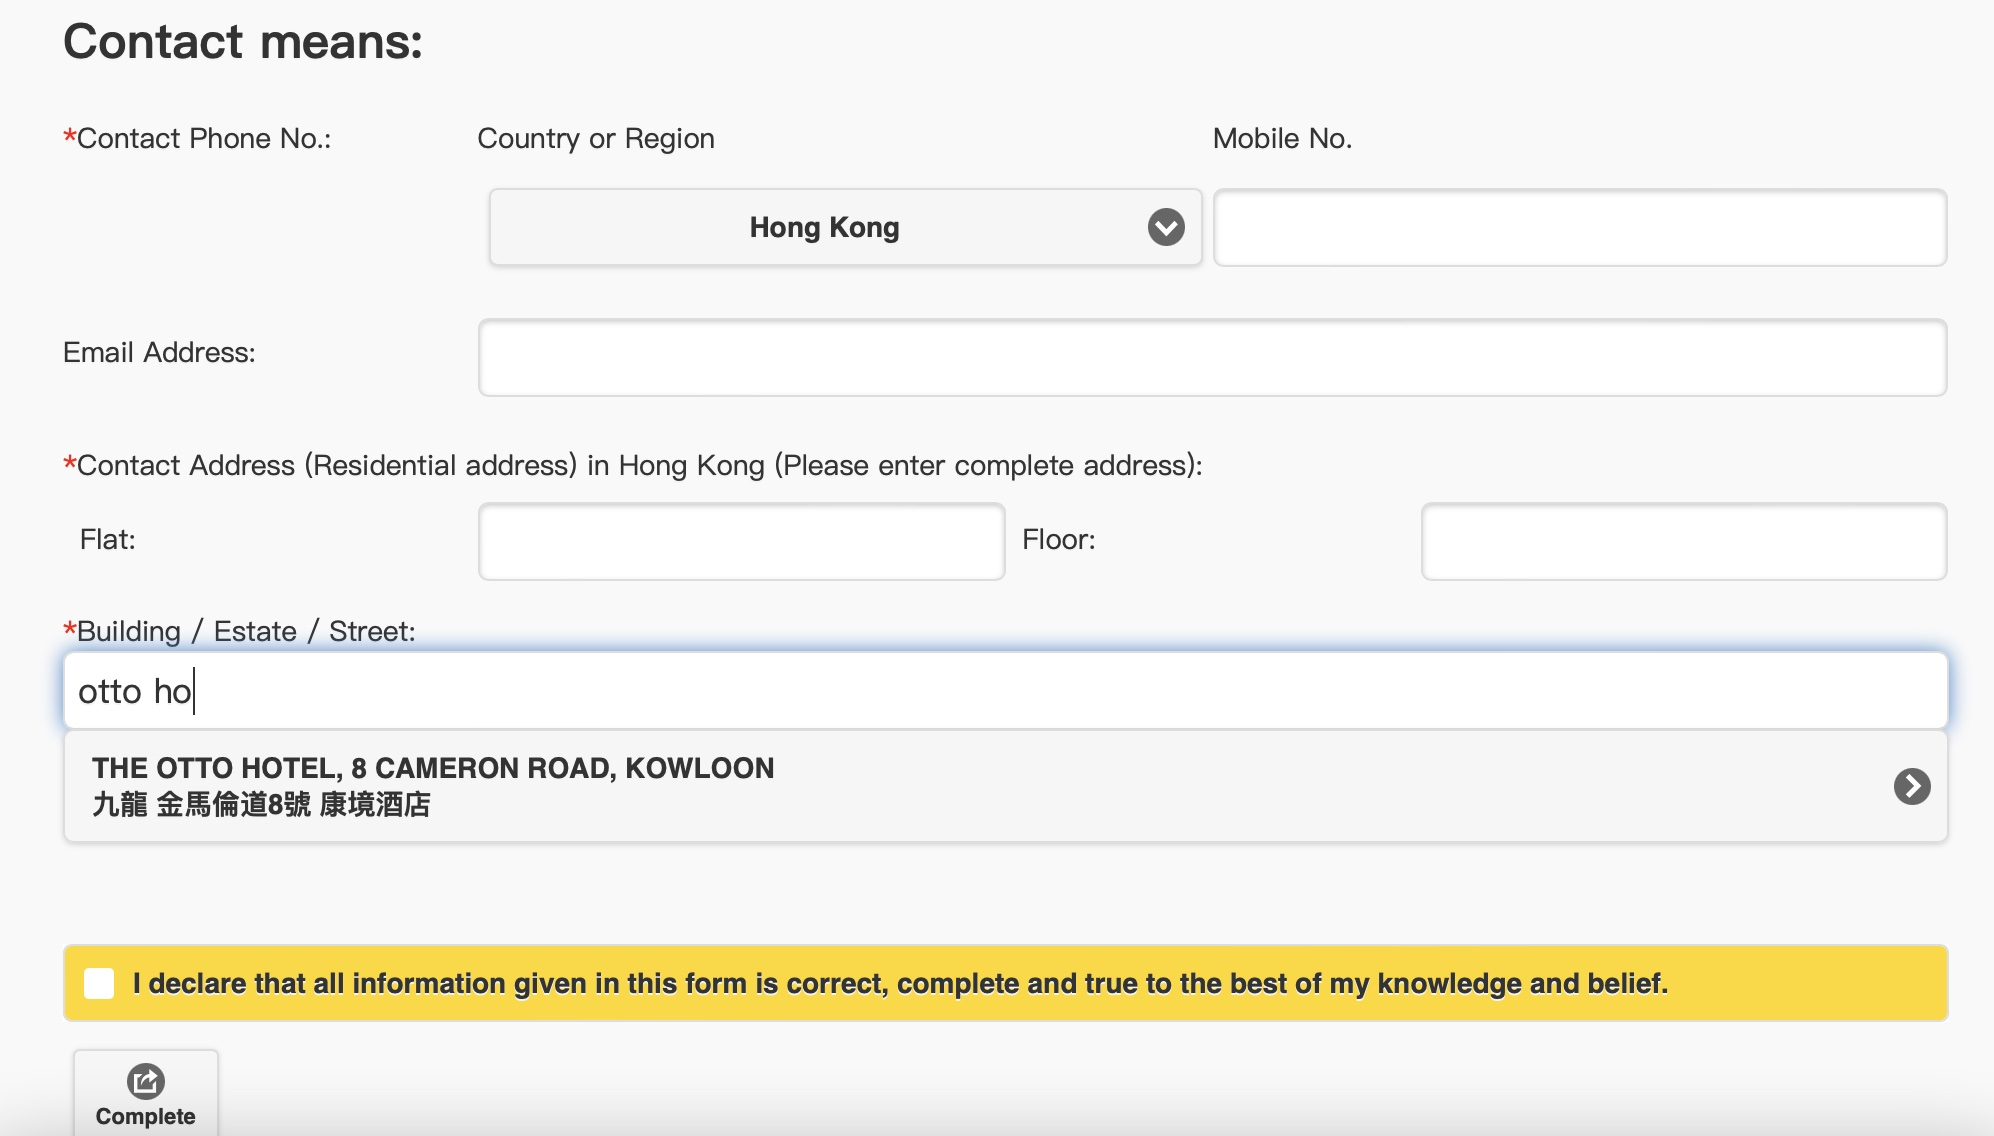 How To Fill Health Declaration Form To Get QR Code To Enter Hong Kong